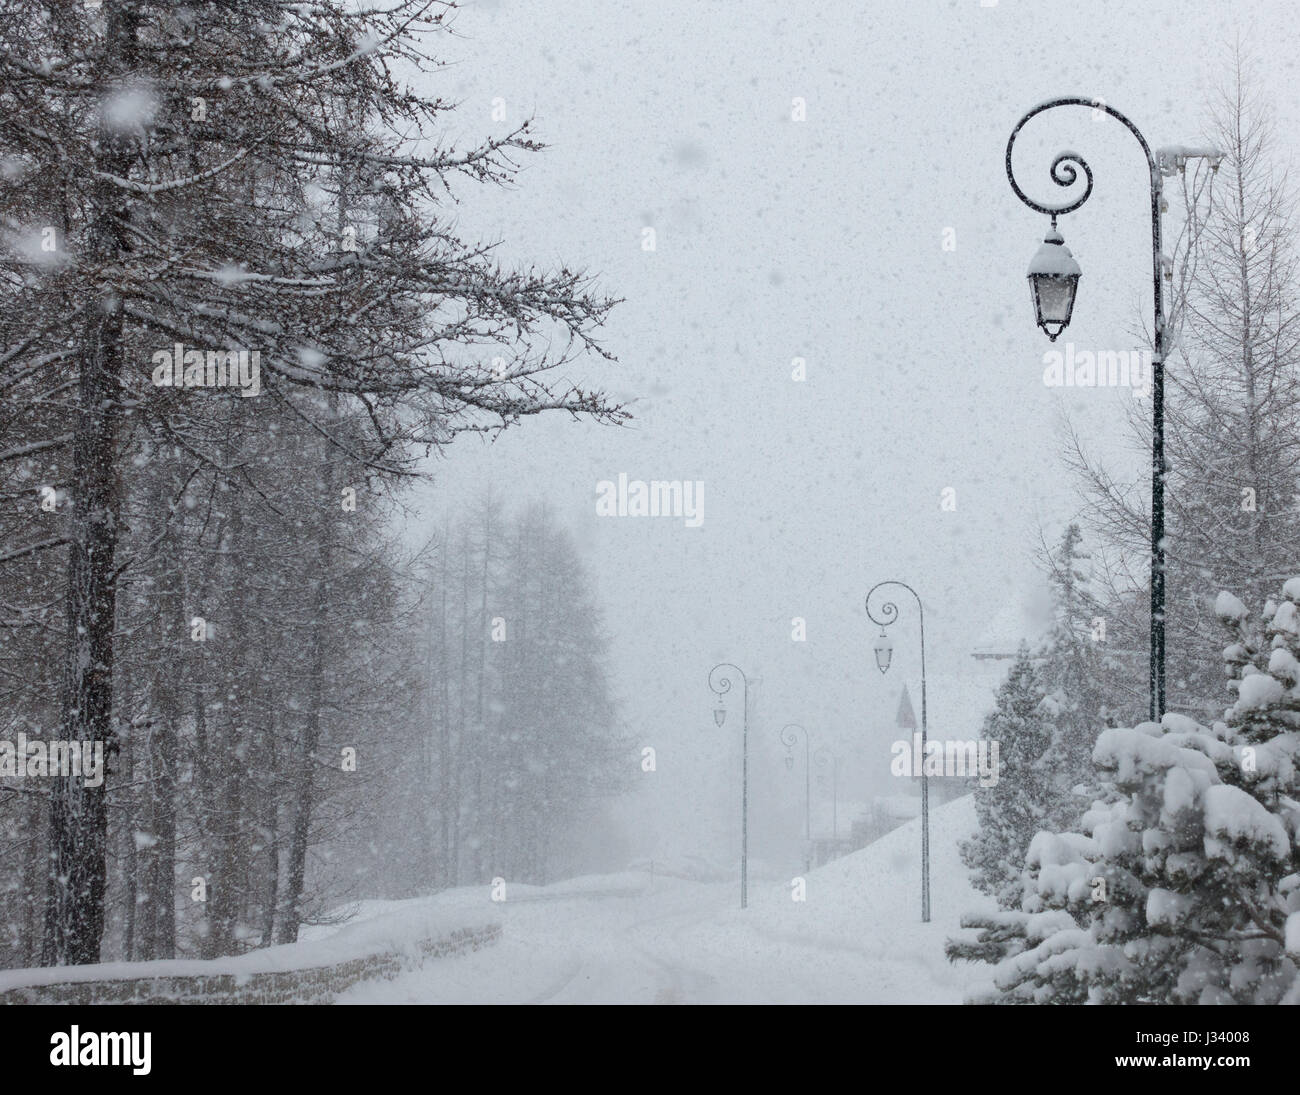 snow snowing falling on a road street scene in the French Alpes with ornate lamp post posts Stock Photo